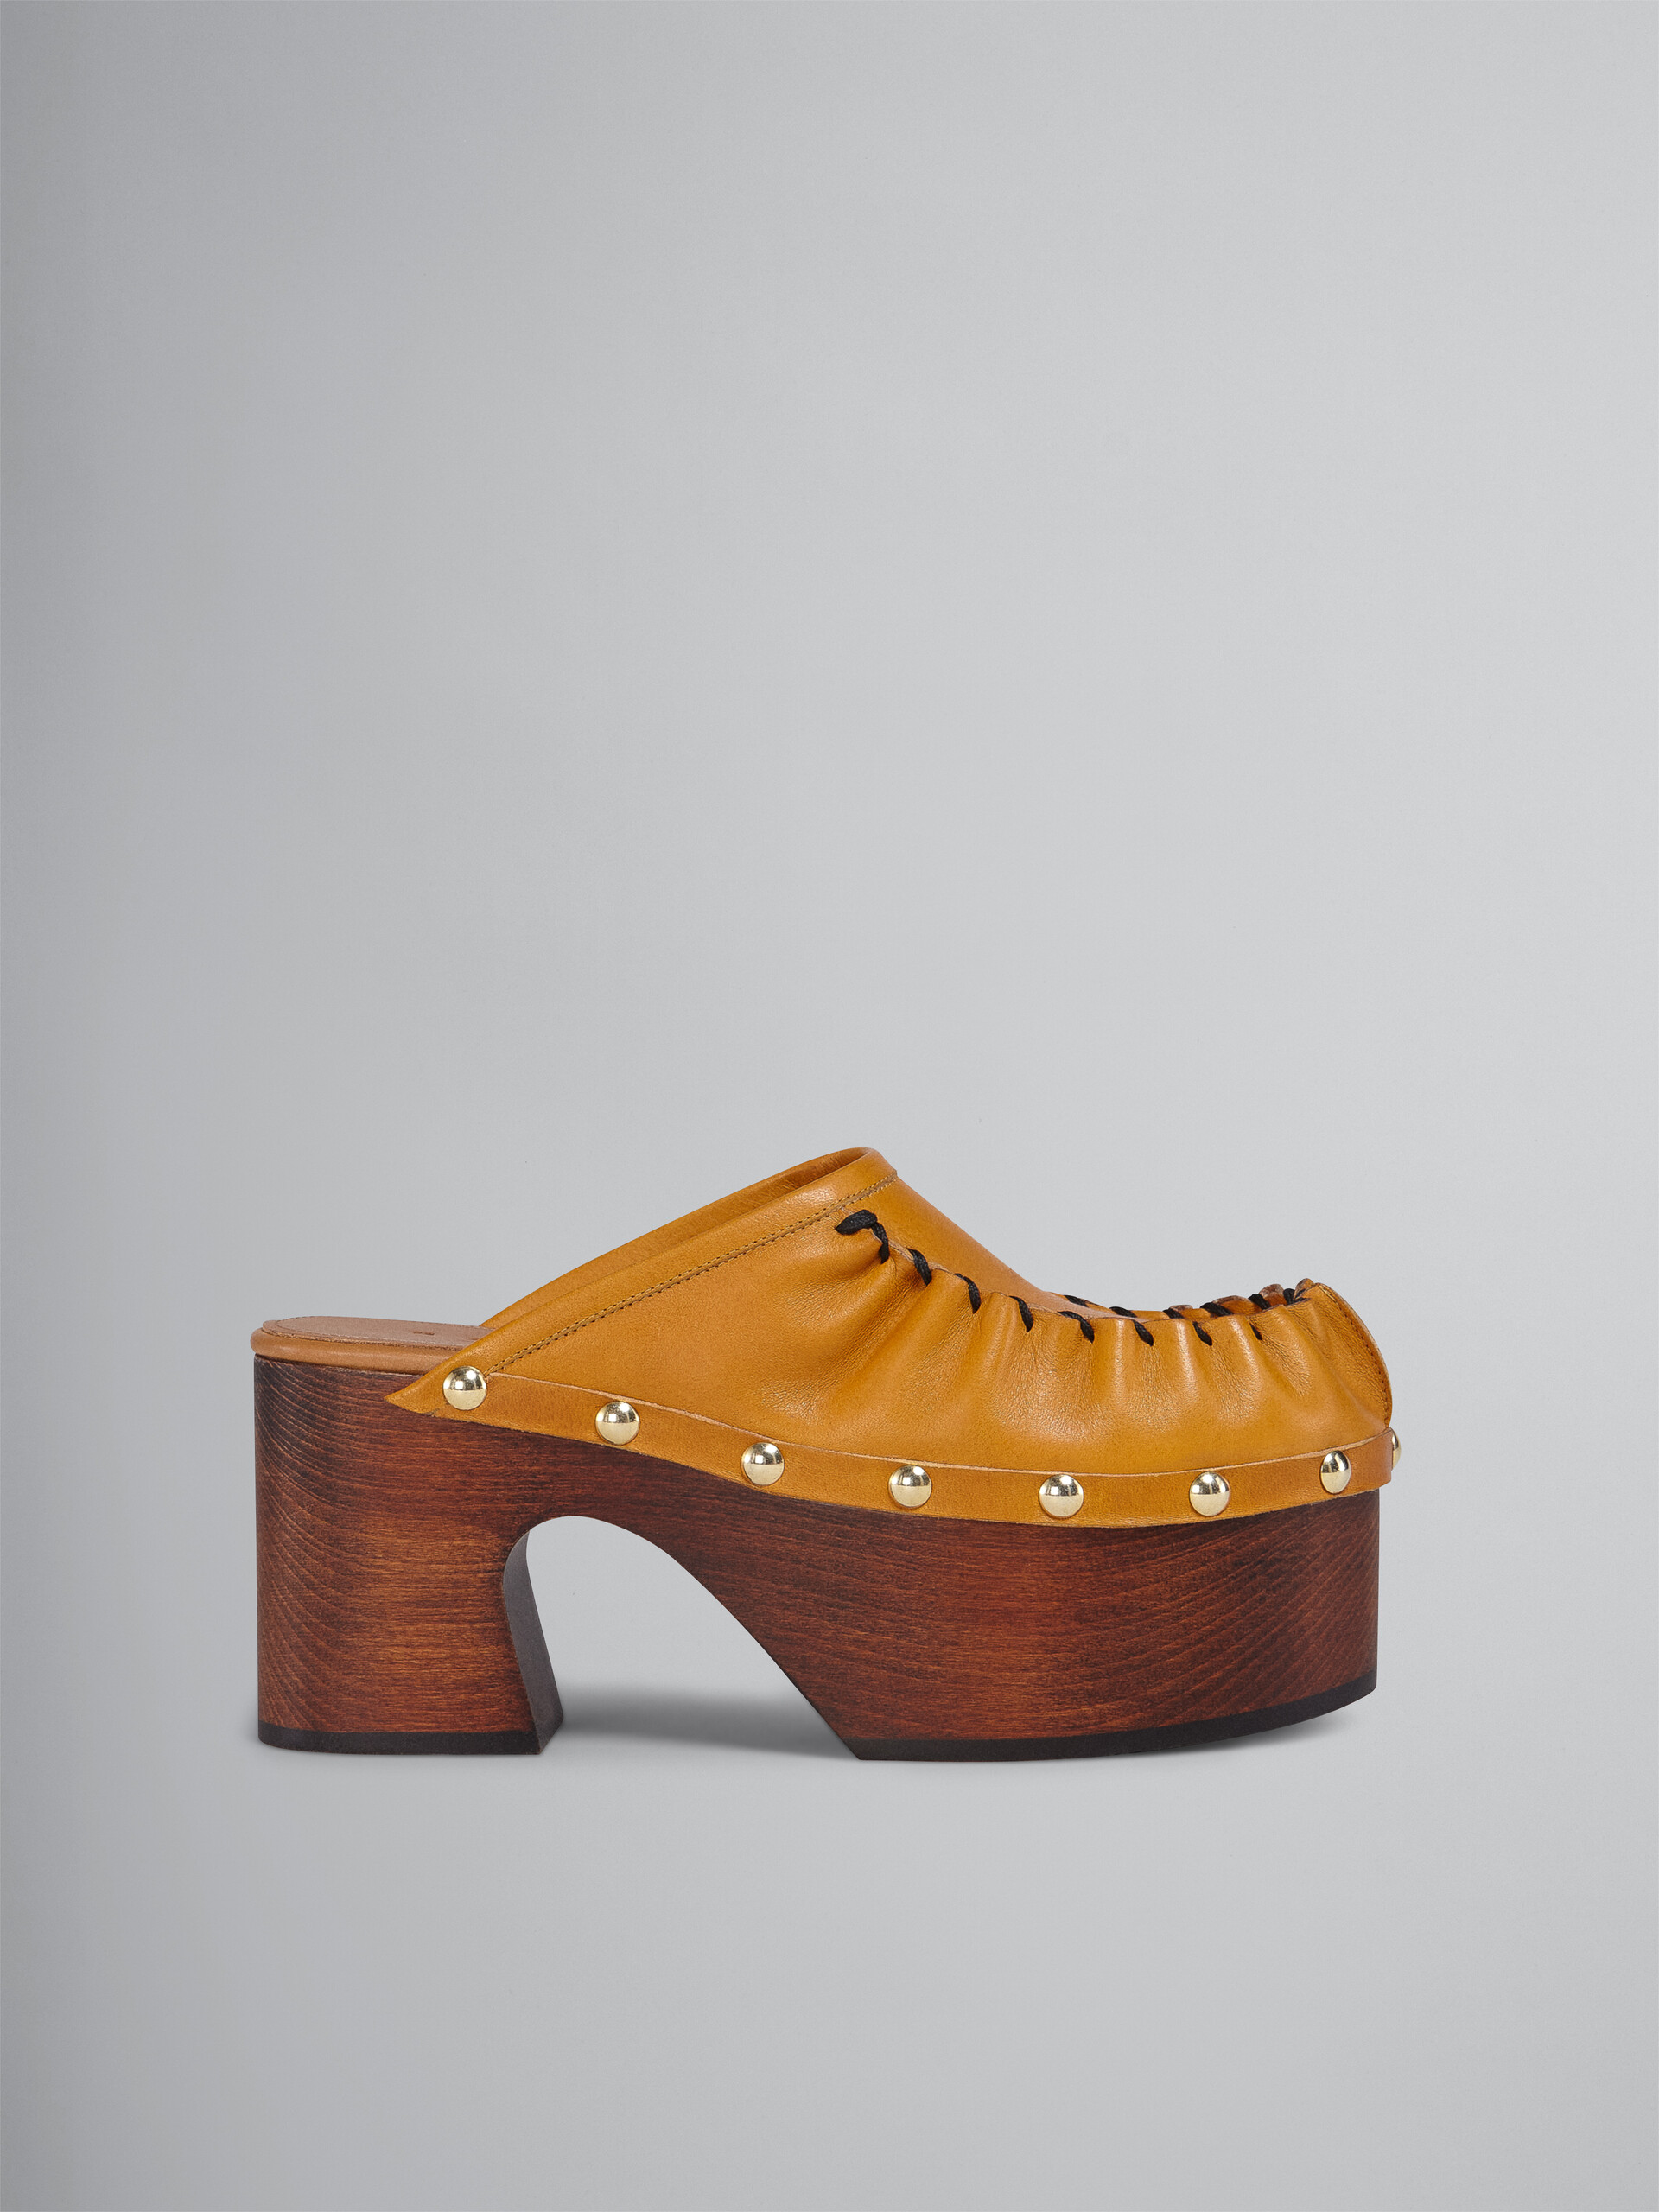 Vegetable-tanned leather sabot - Clogs - Image 1